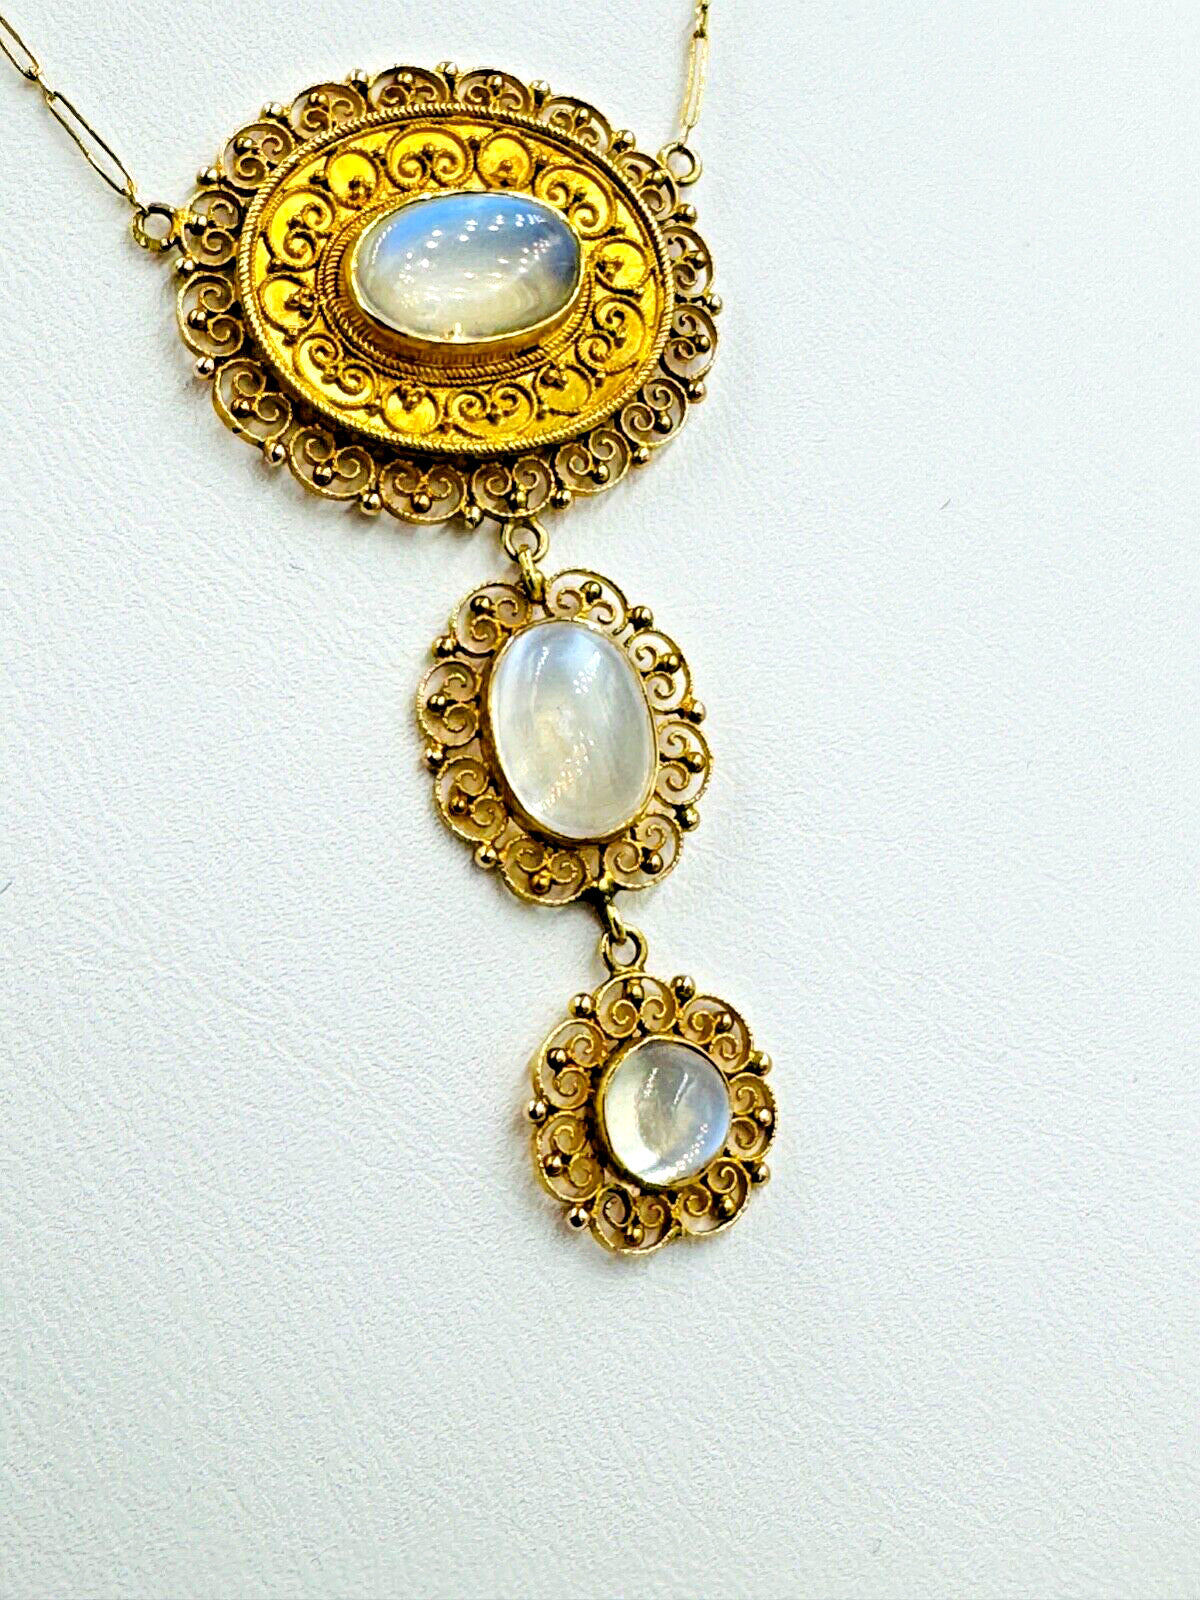 Victorian French 18k yellow Gold Moonstone Drop filigree Pendant Necklace